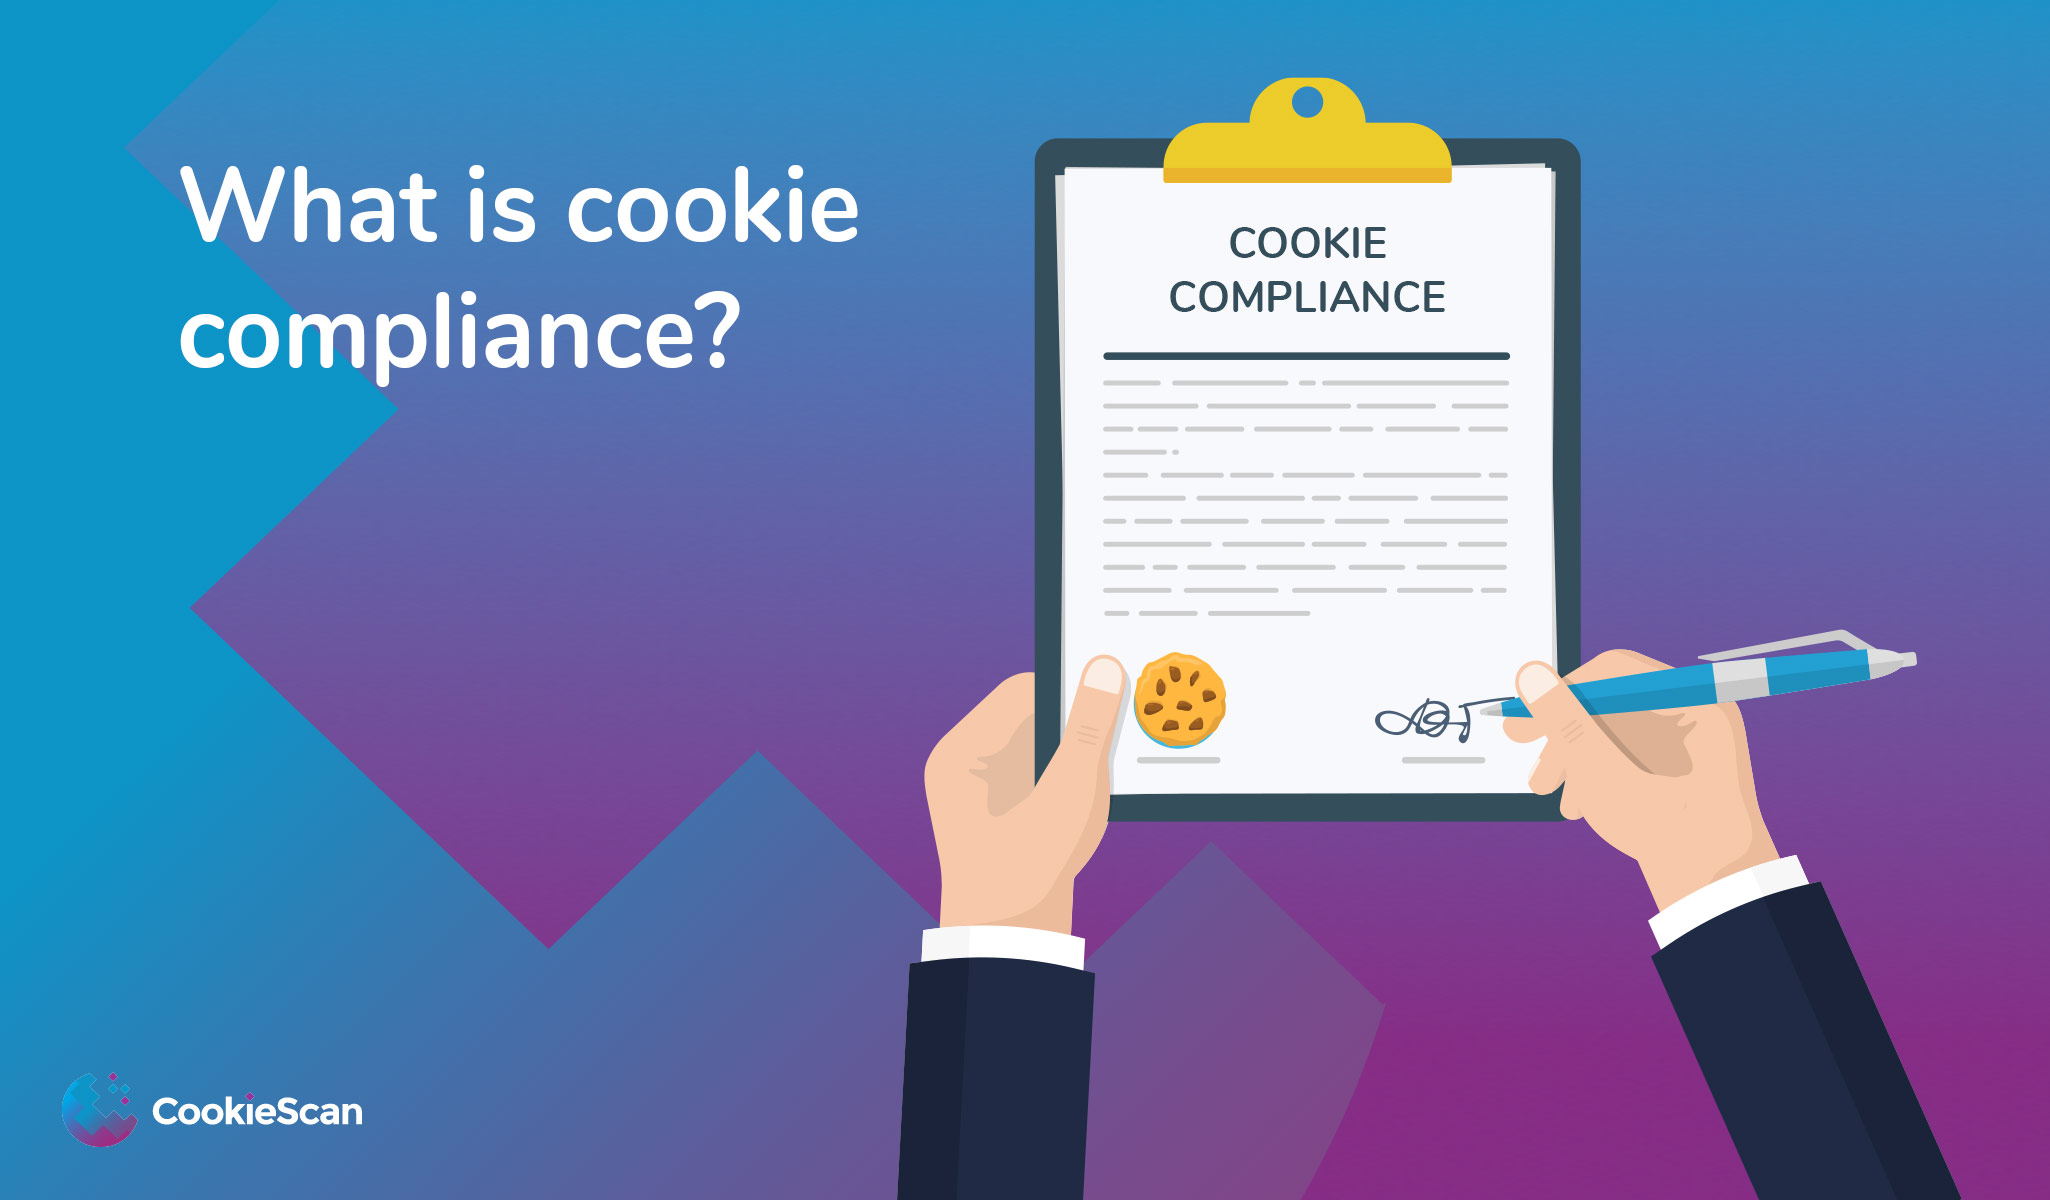 What is Cookie Compliance?